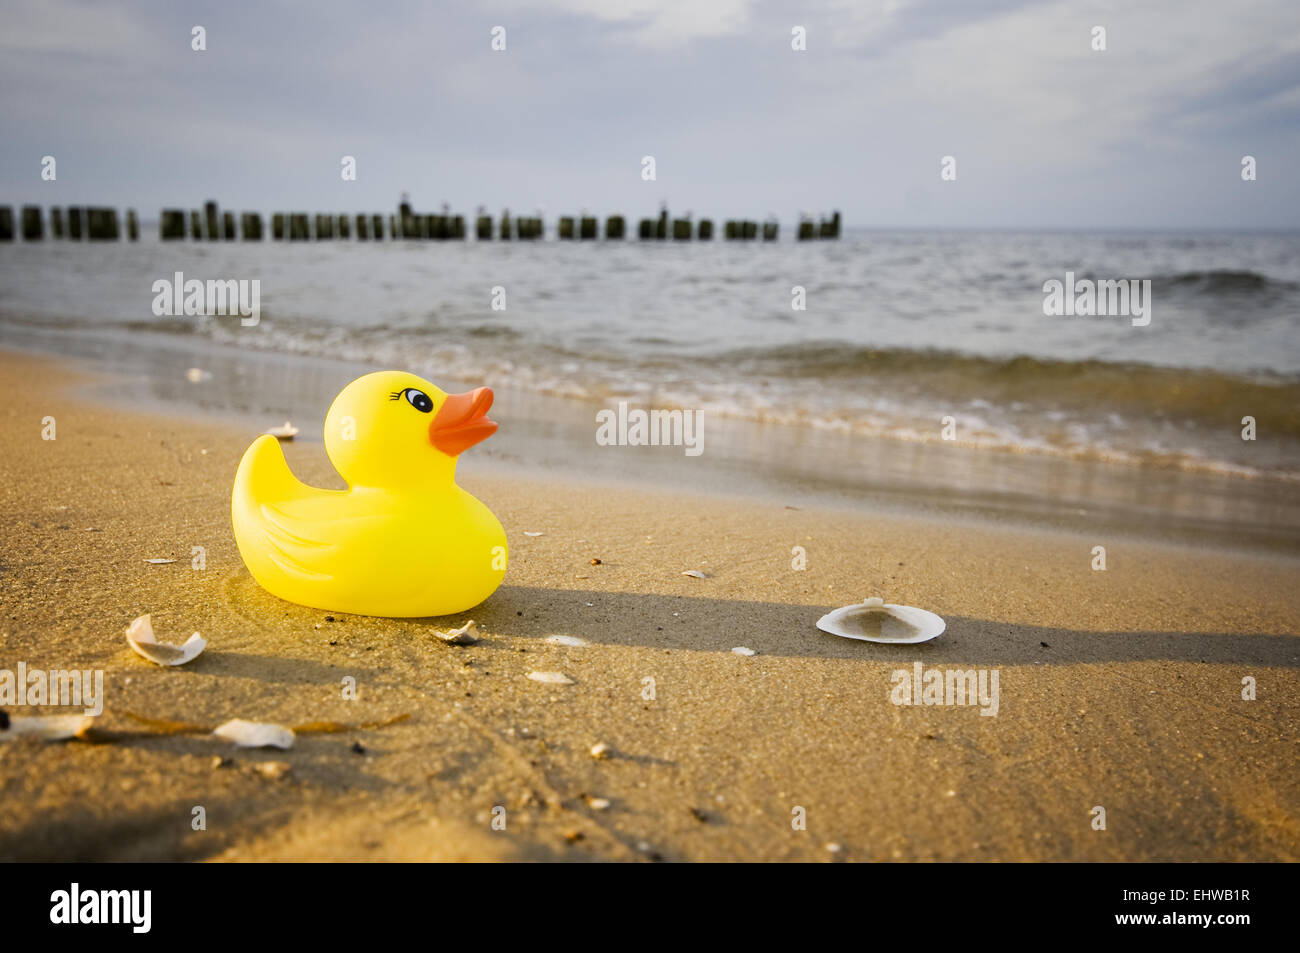 rubber duck with shells Stock Photo